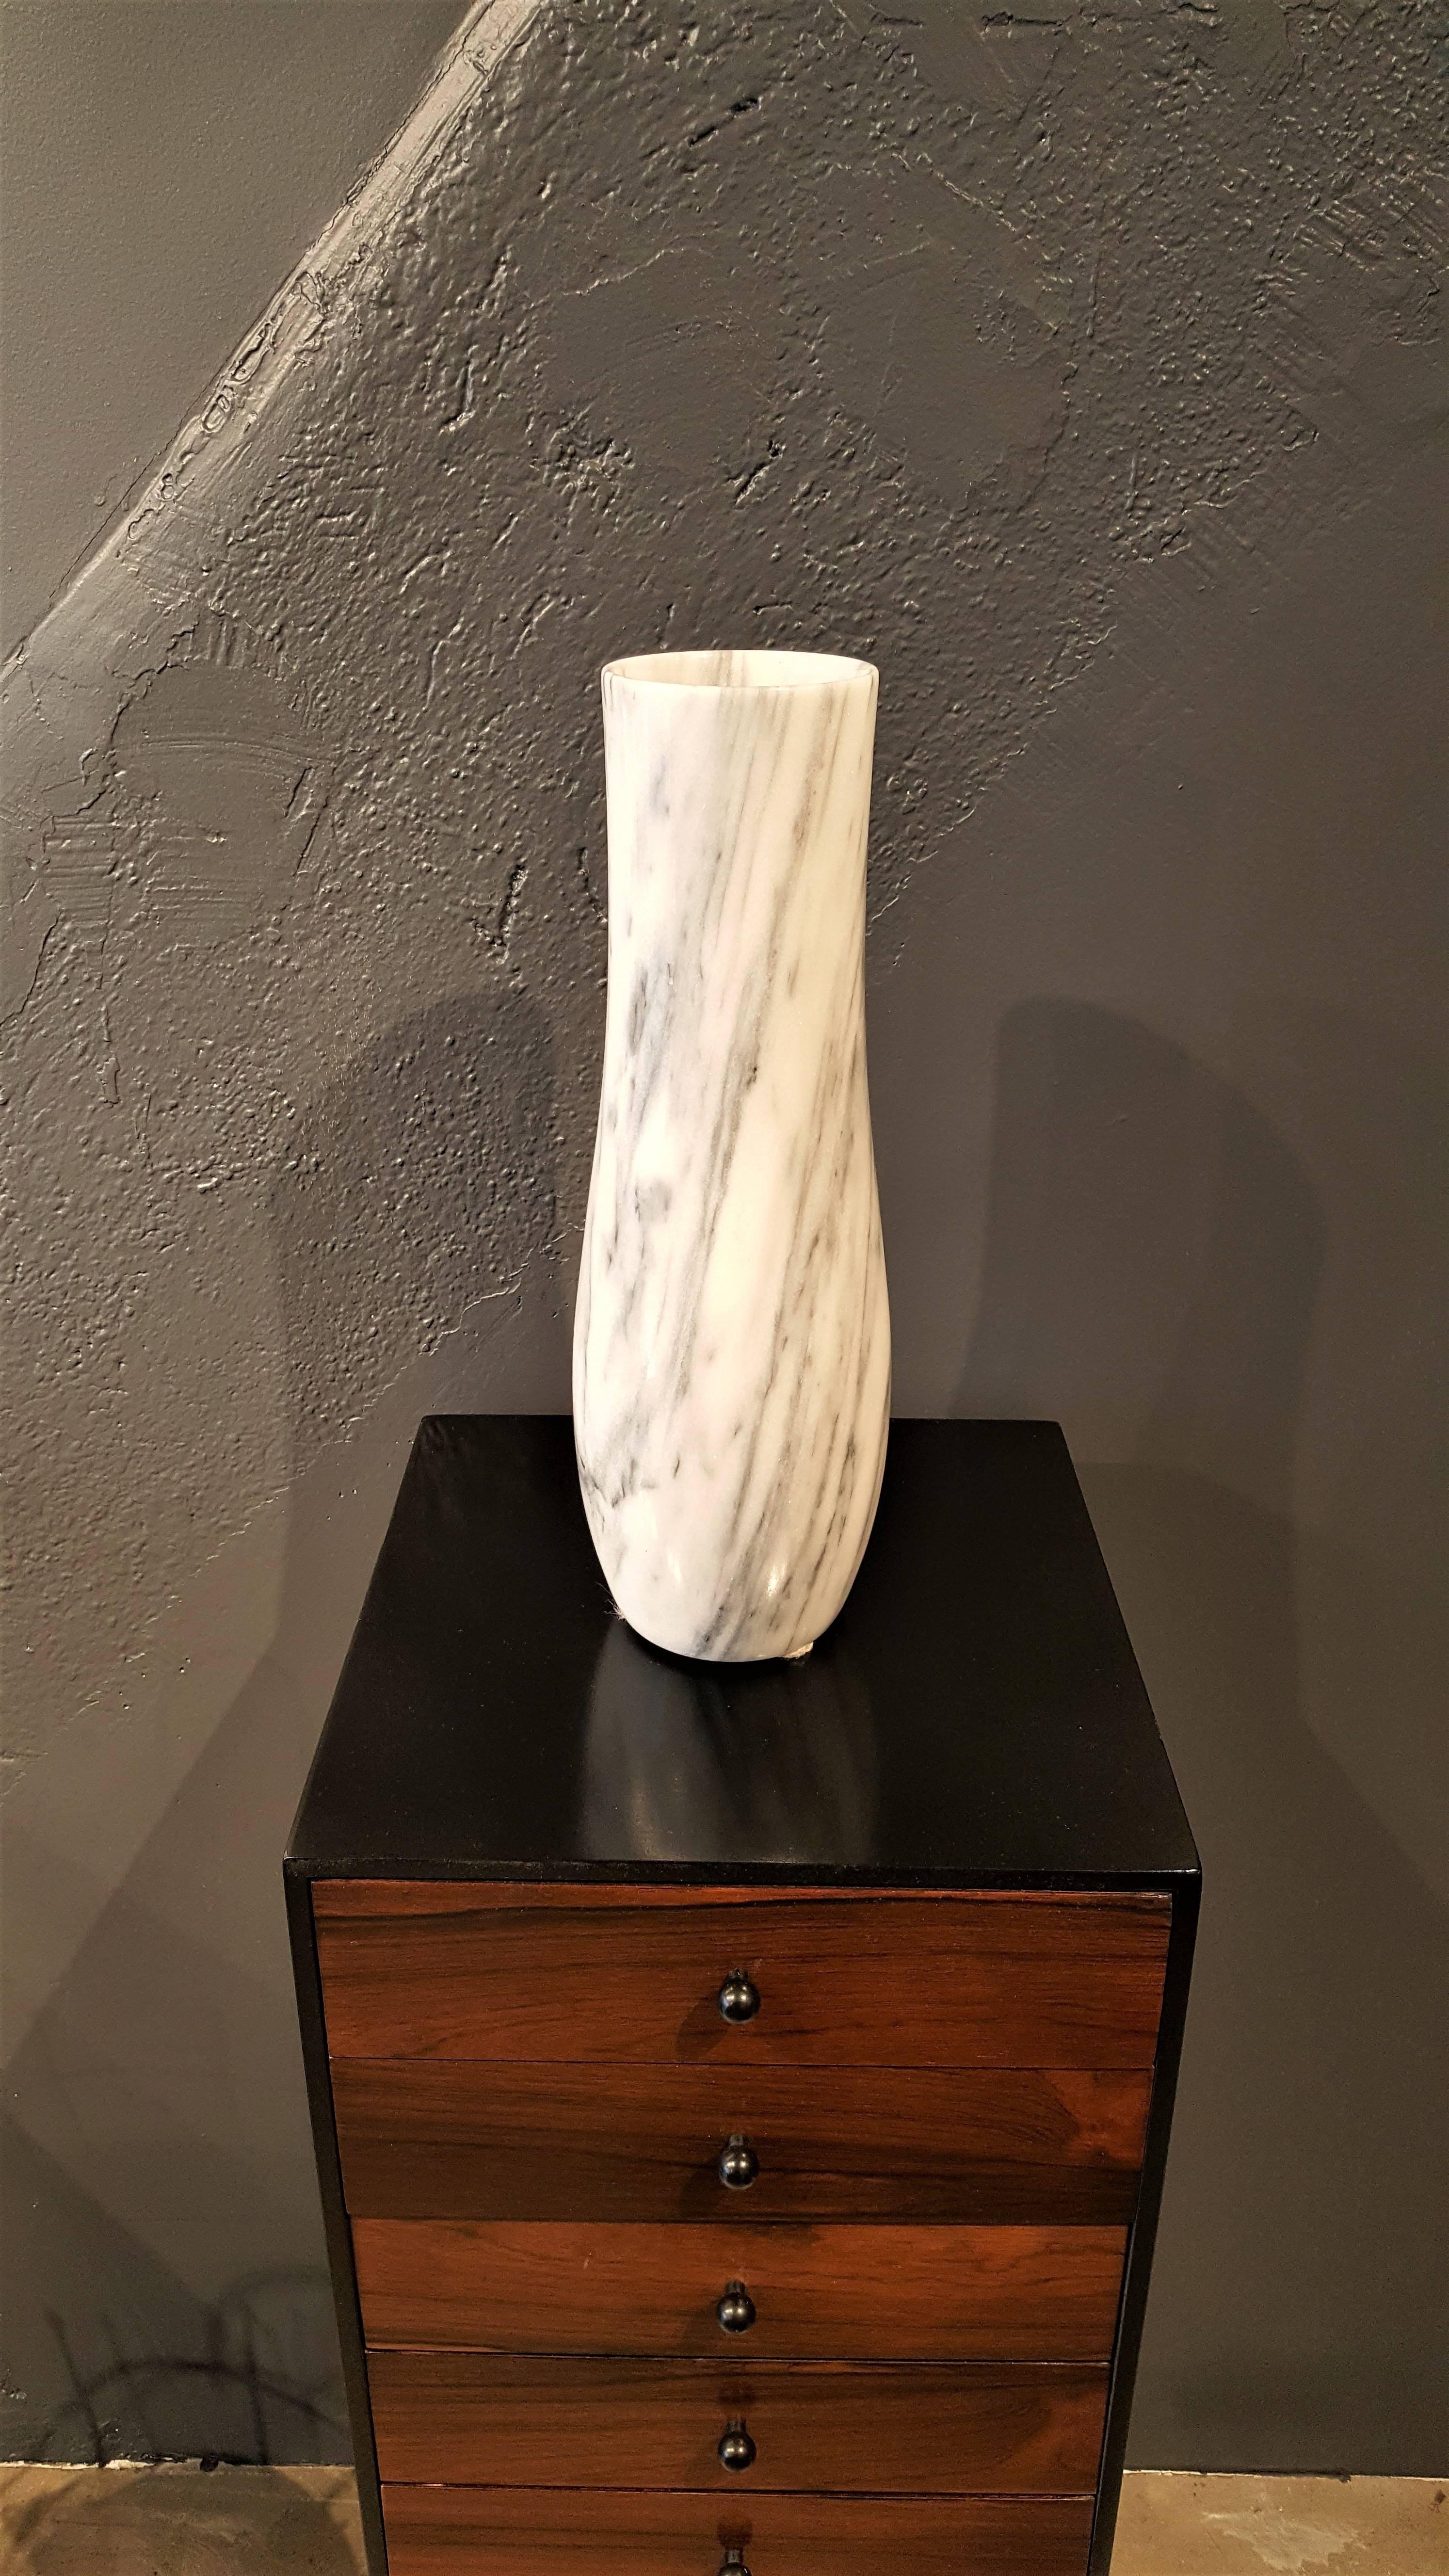 Massive Carrara Marble Vase with Dramatic Striations, Italy 1950s. Excellent condition. Would make for a gorgeous centerpiece on a dining table, mantel or in a foyer or entryway. 

Whether furnishing a contemporary Soho loft or stylish post-war Park